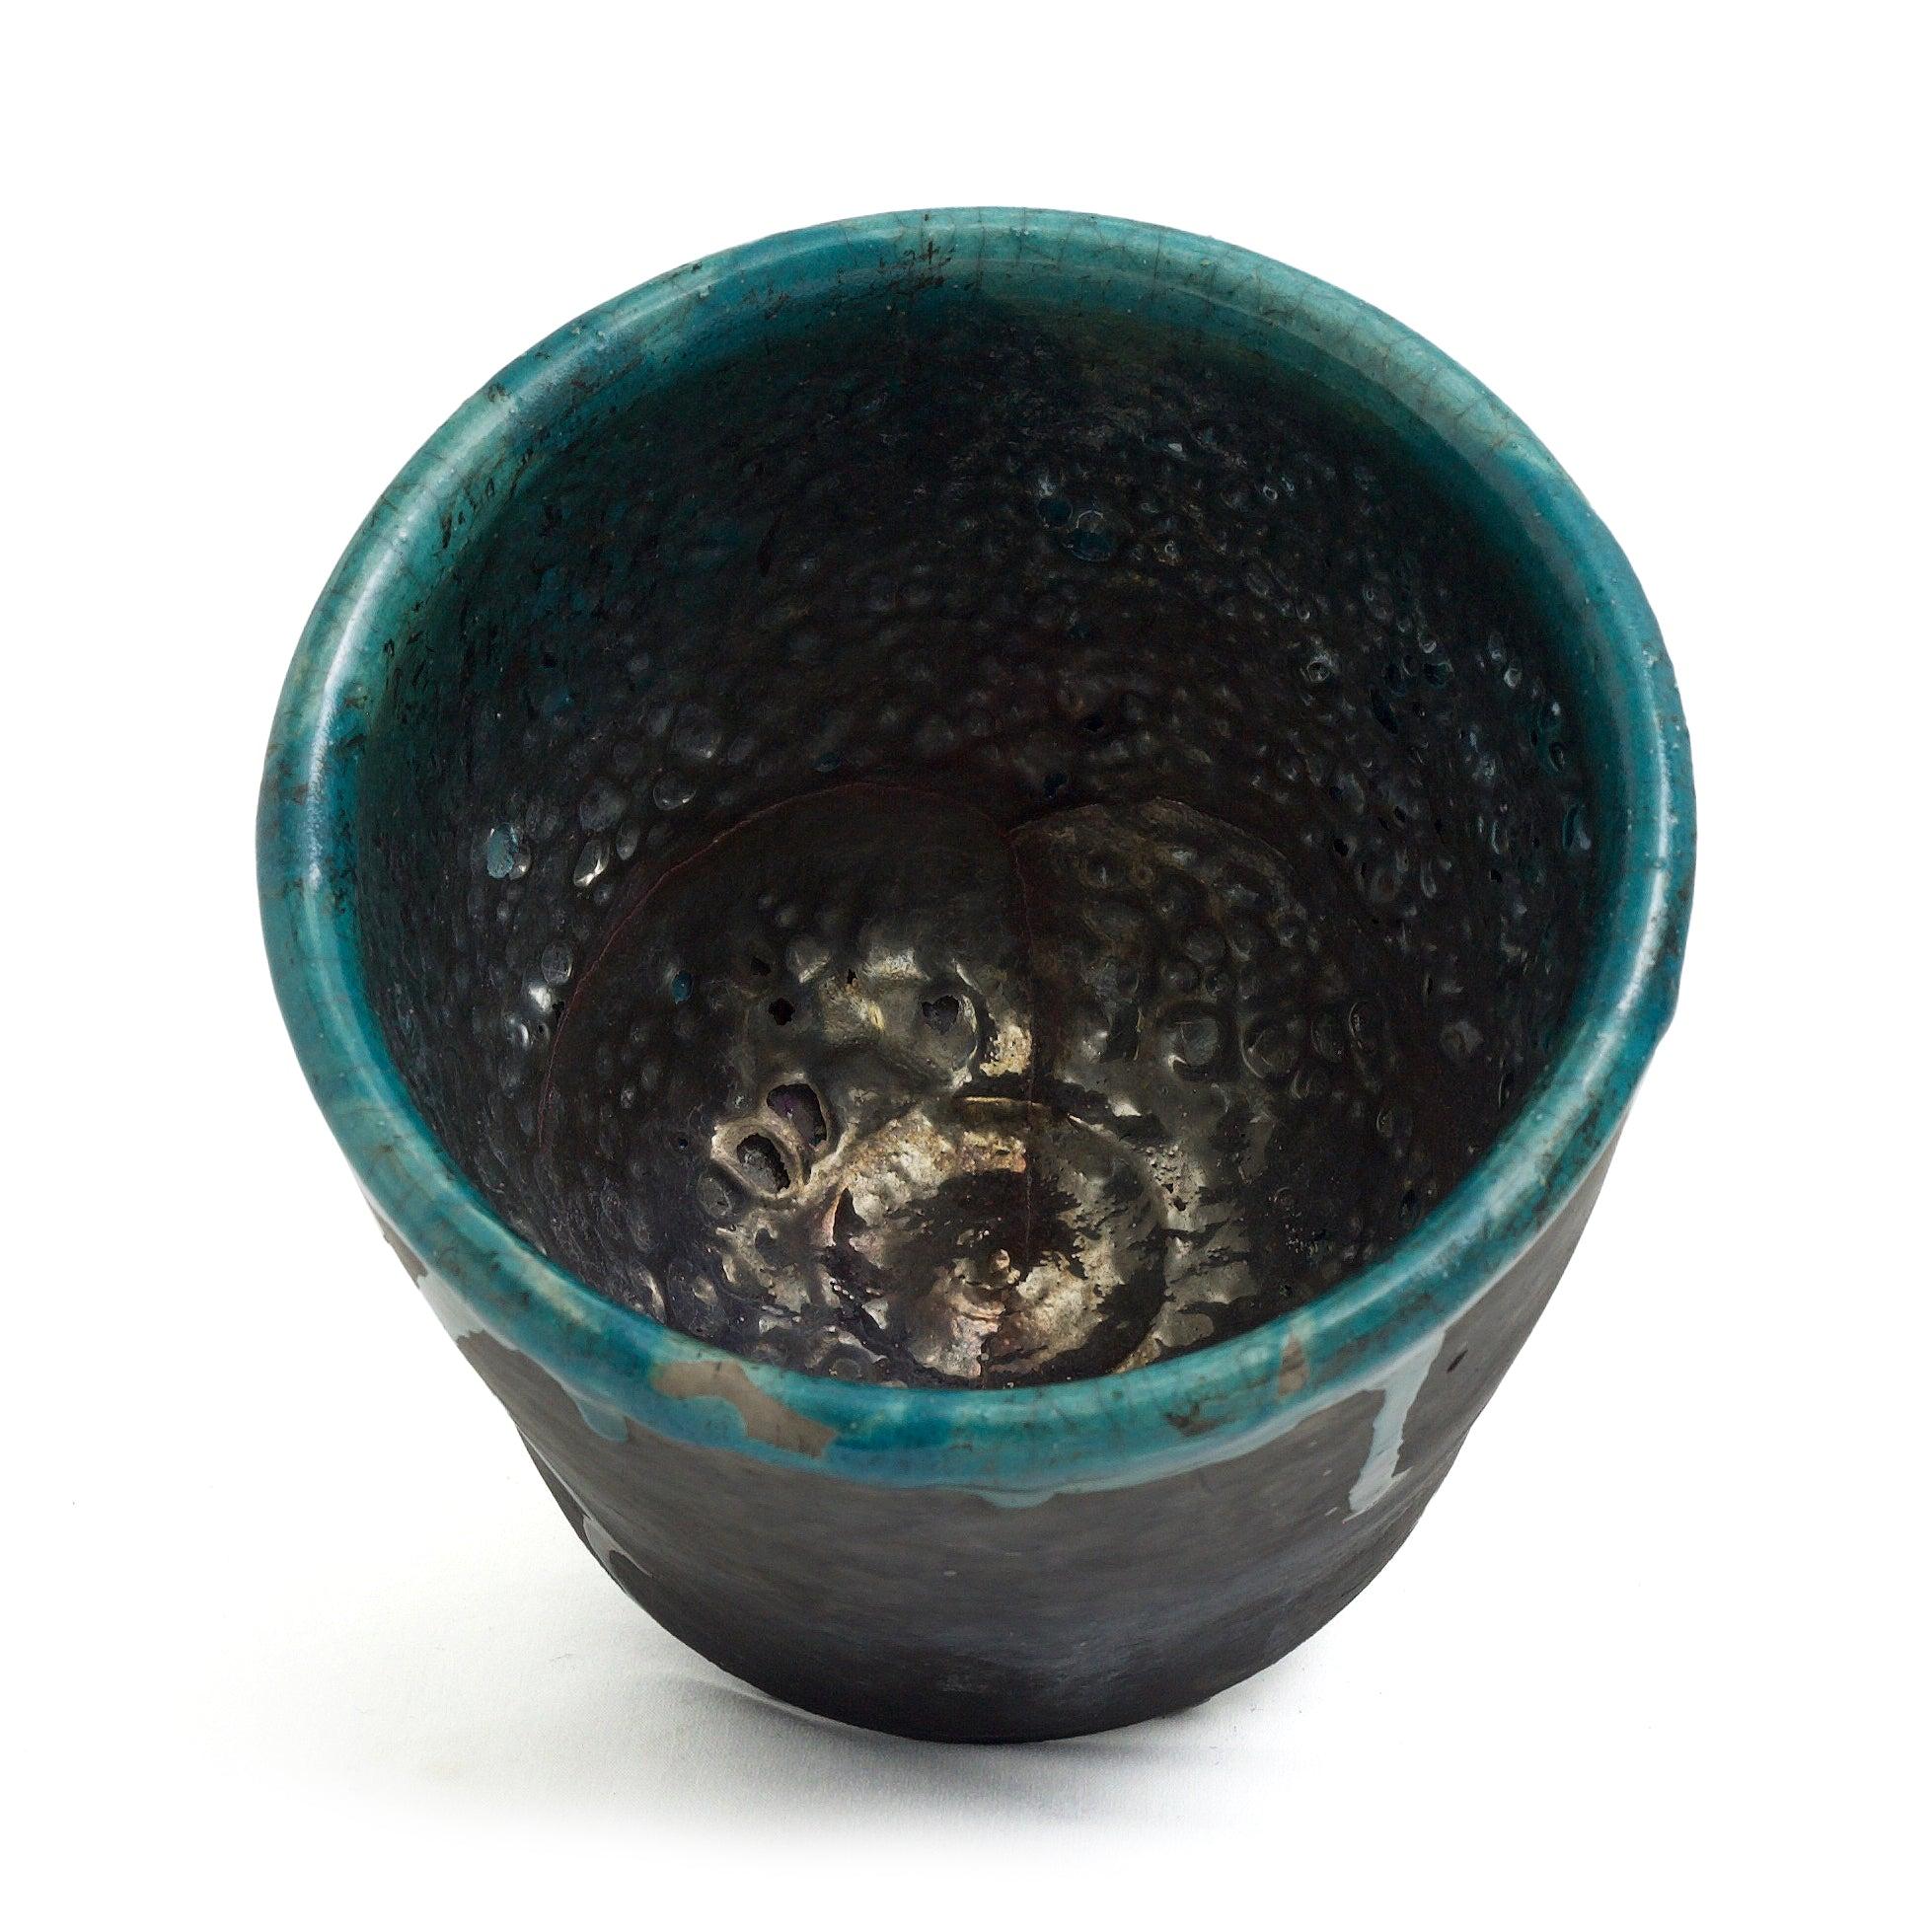 Contemporary Laab Artide Vase Mangkuk Bowl Ceramic Metal Coating Black Green In New Condition For Sale In monza, Monza and Brianza